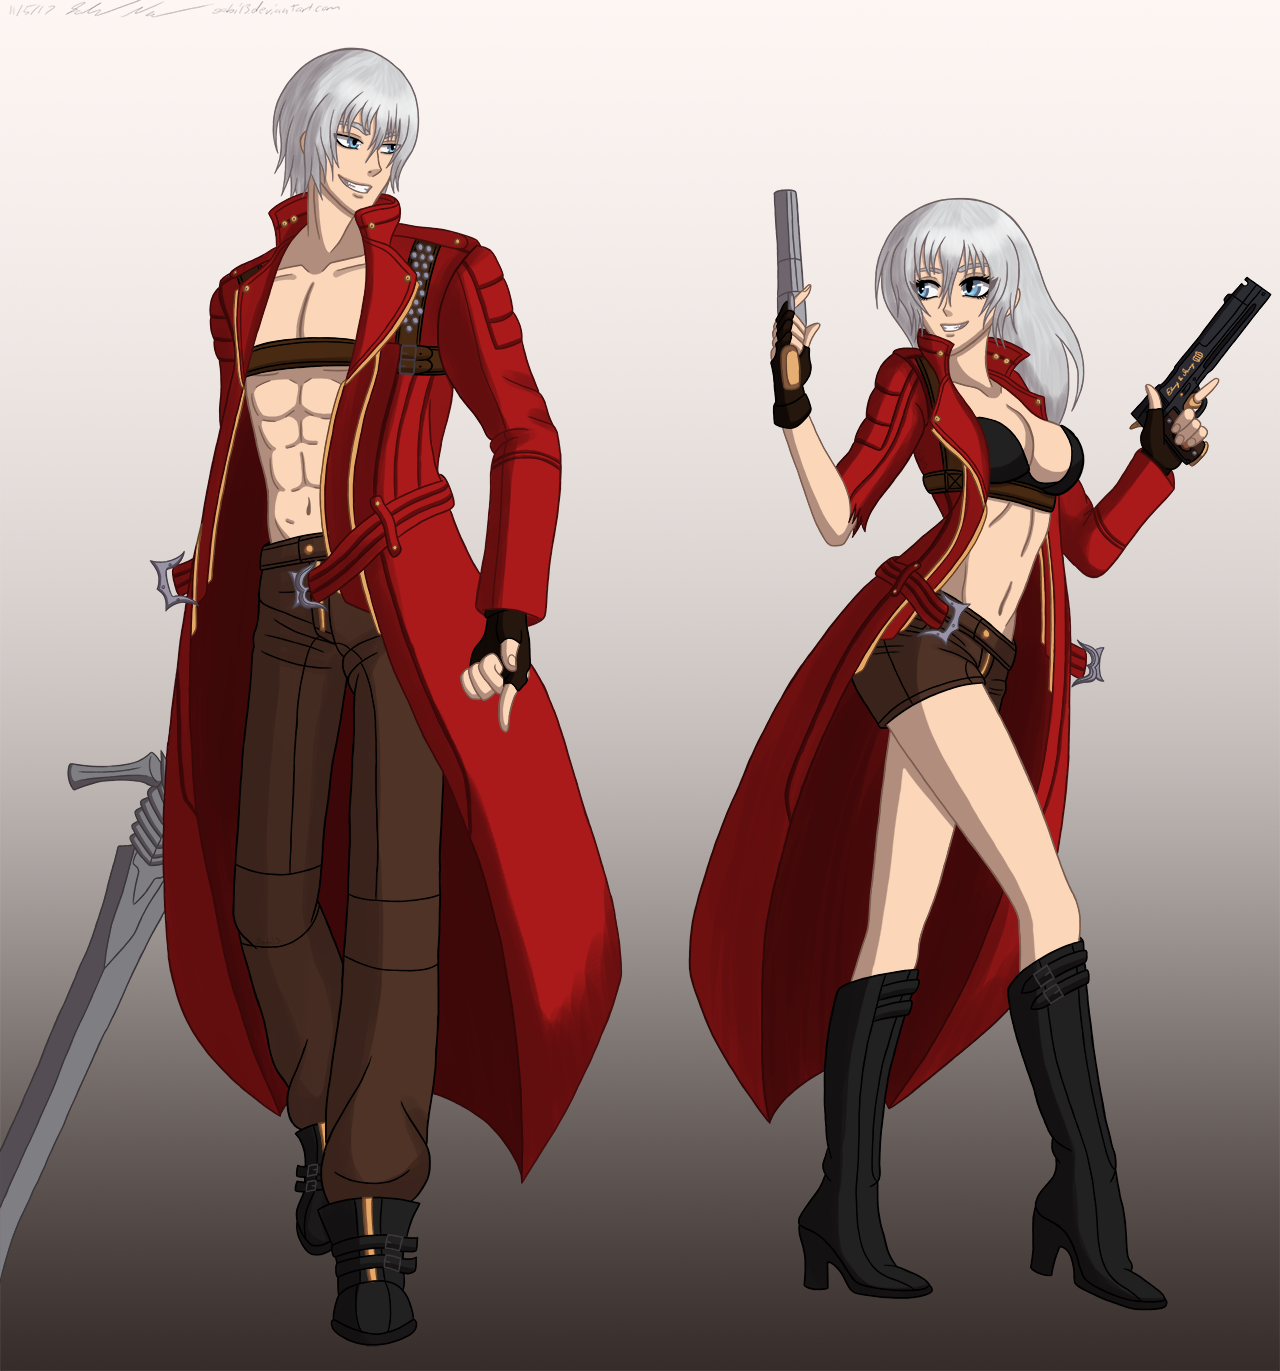 genderbent DMC 5 characters (because i wanted to unnerve my brother) :  r/DevilMayCry